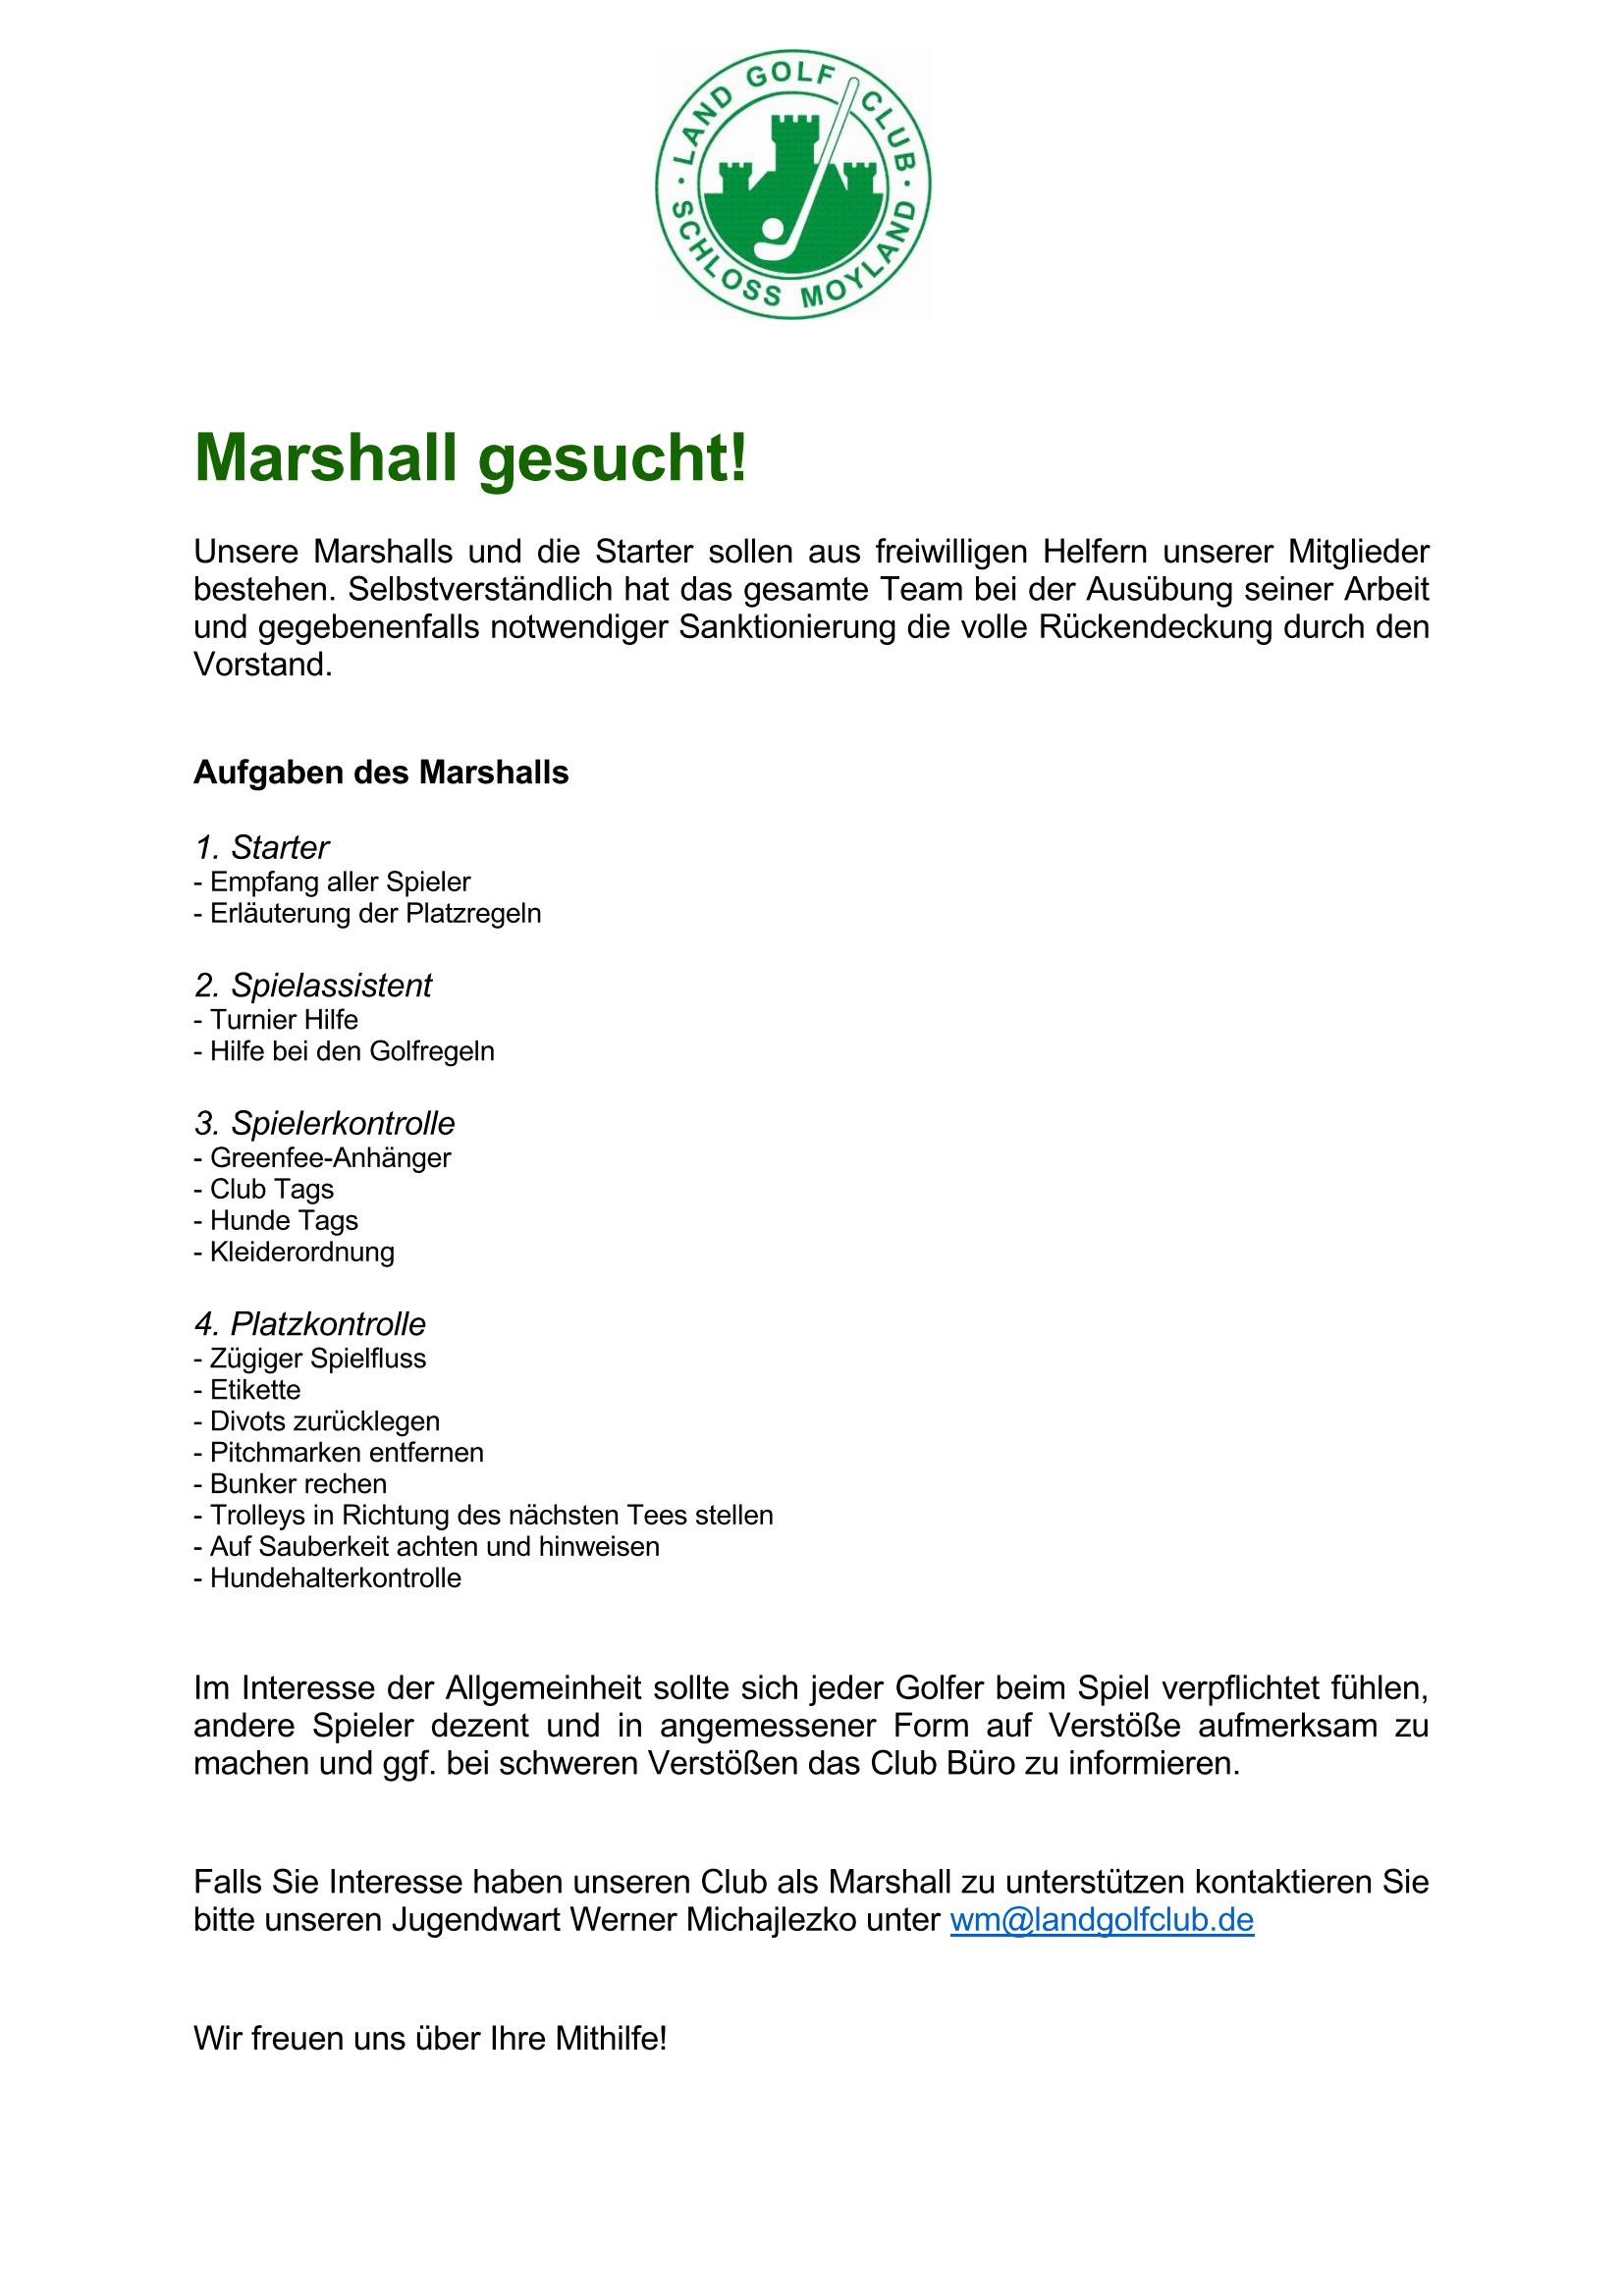 Marshall gesucht Page 1